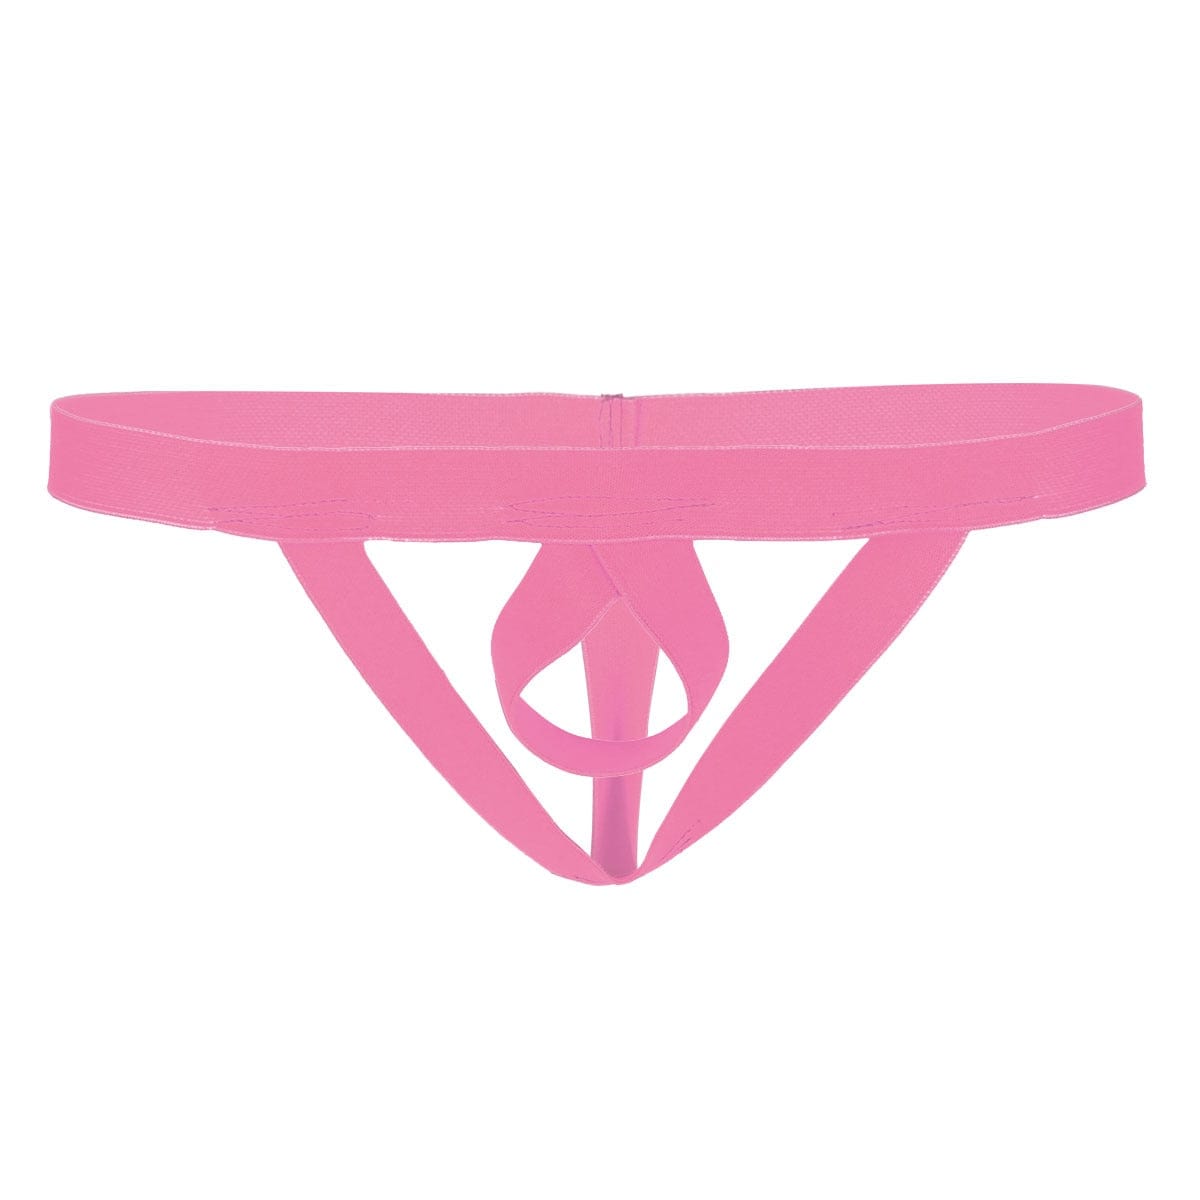 Kinky Cloth Rose Pink / One Size Low Rise Jockstrap Stretchy Thongs